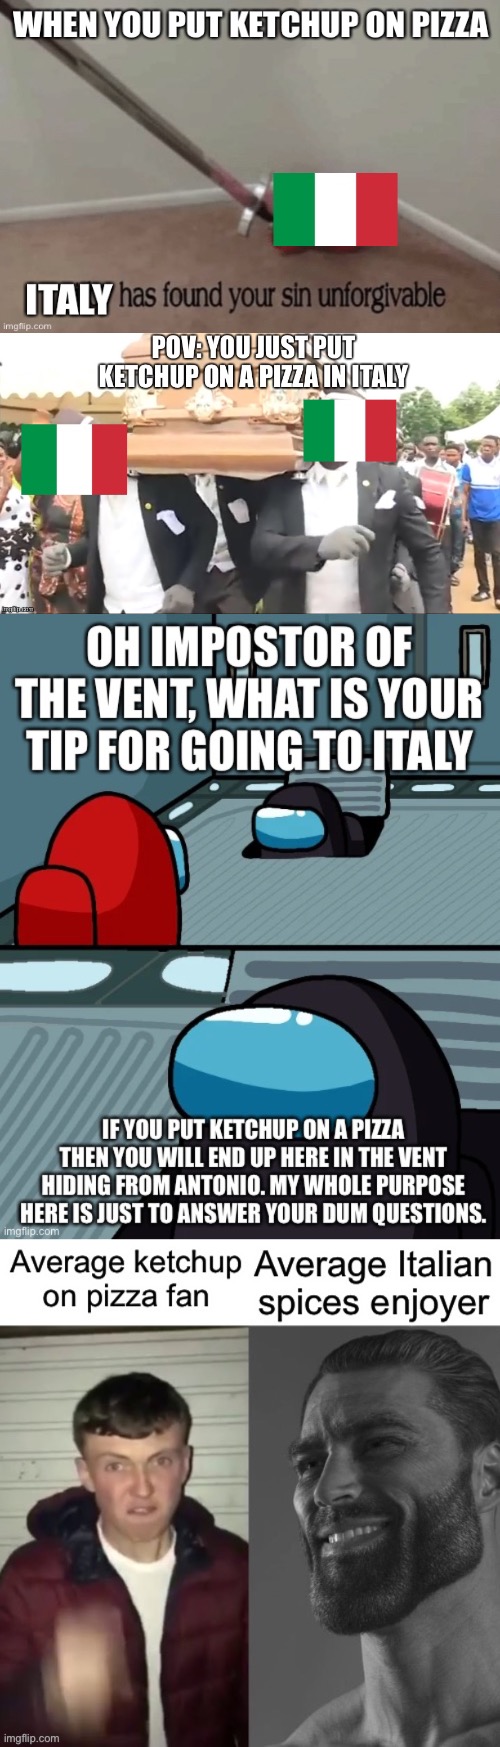 Italy ketchup and pizza super meme pack or something | image tagged in italy,funny,pizza,memes,ketchup,mix | made w/ Imgflip meme maker